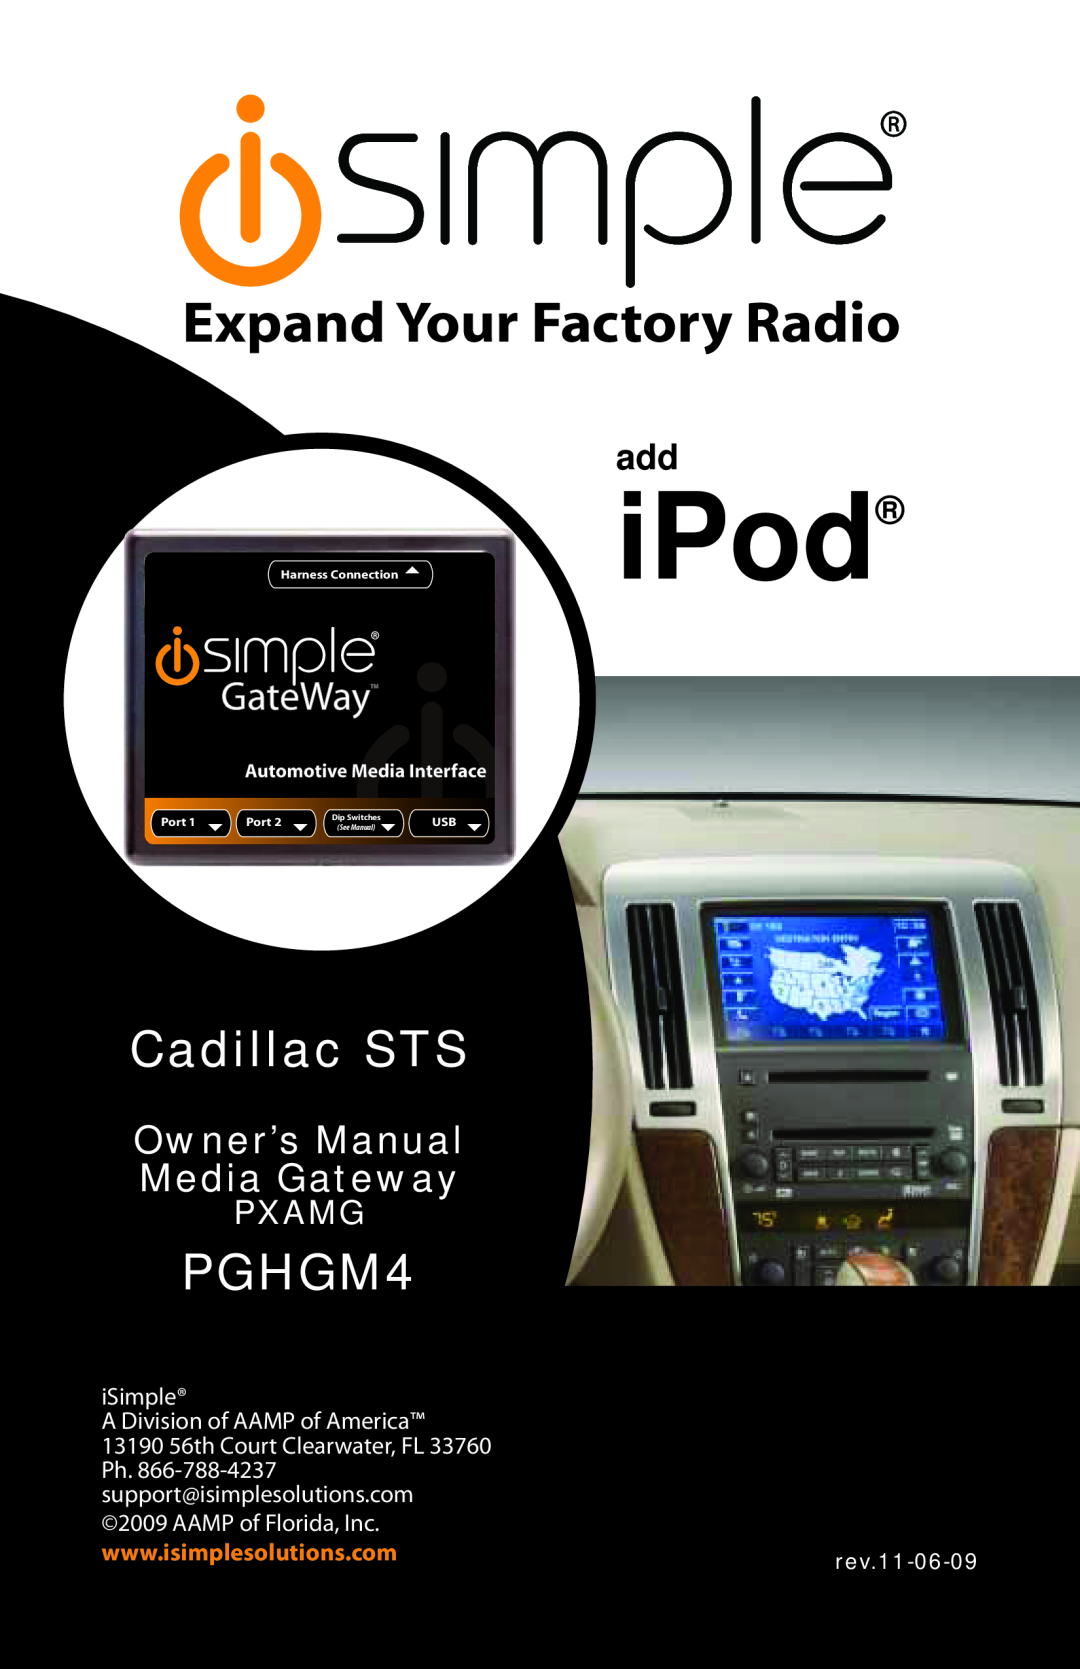 iSimple PGHGM4 owner manual iPod, Expand Your Factory Radio, Cadillac STS, Pxamg, iSimple, A Division of AAMP of America 